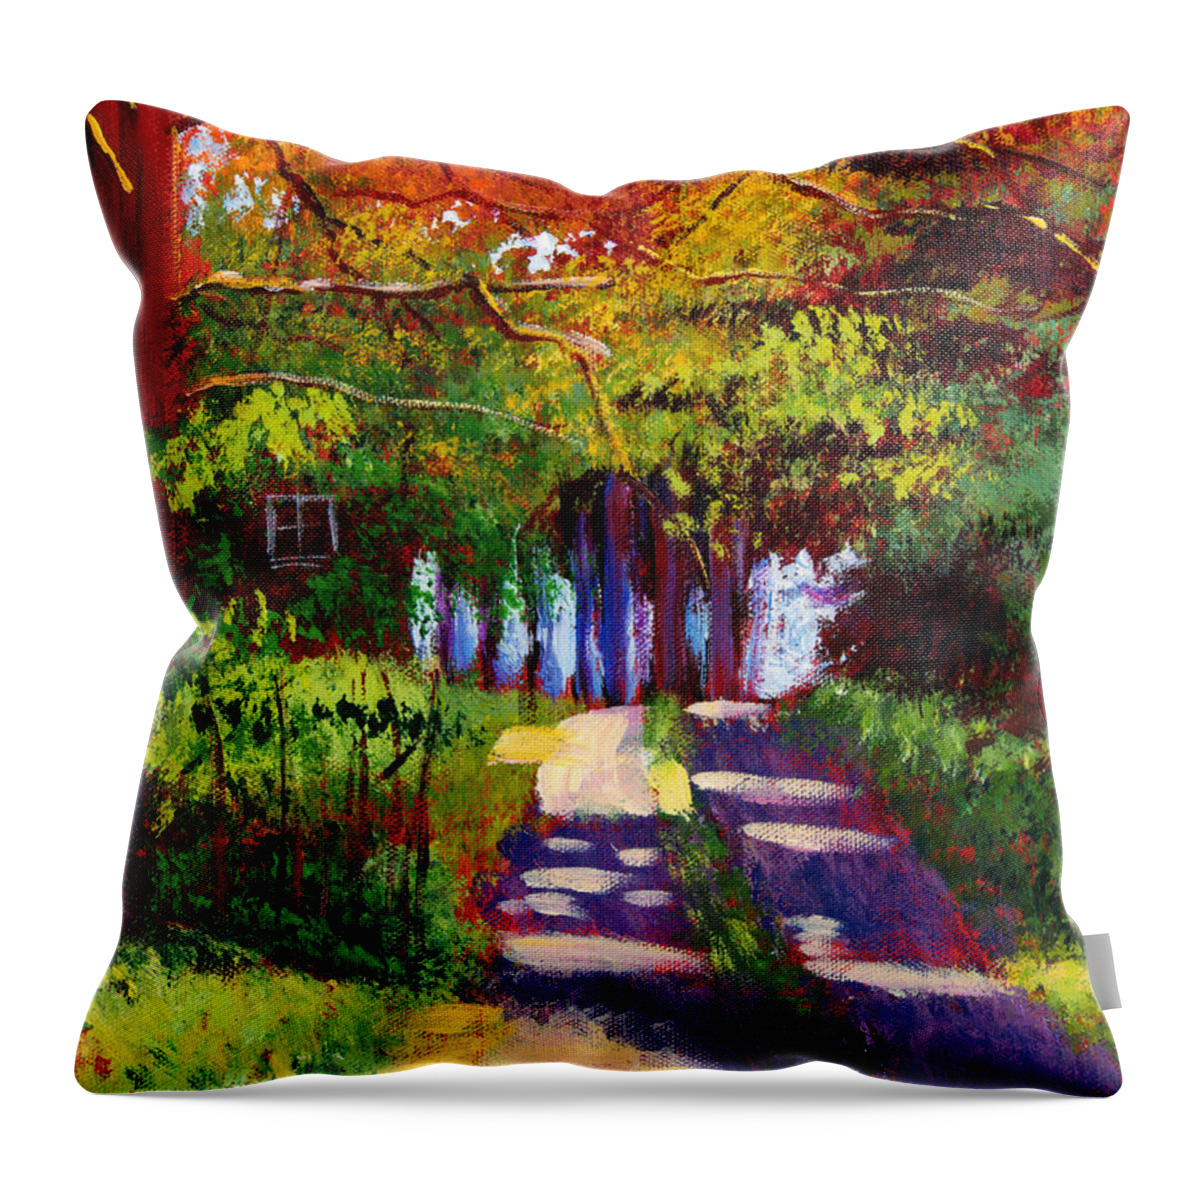 Landscape Throw Pillow featuring the painting Cool Country Land plein air by David Lloyd Glover